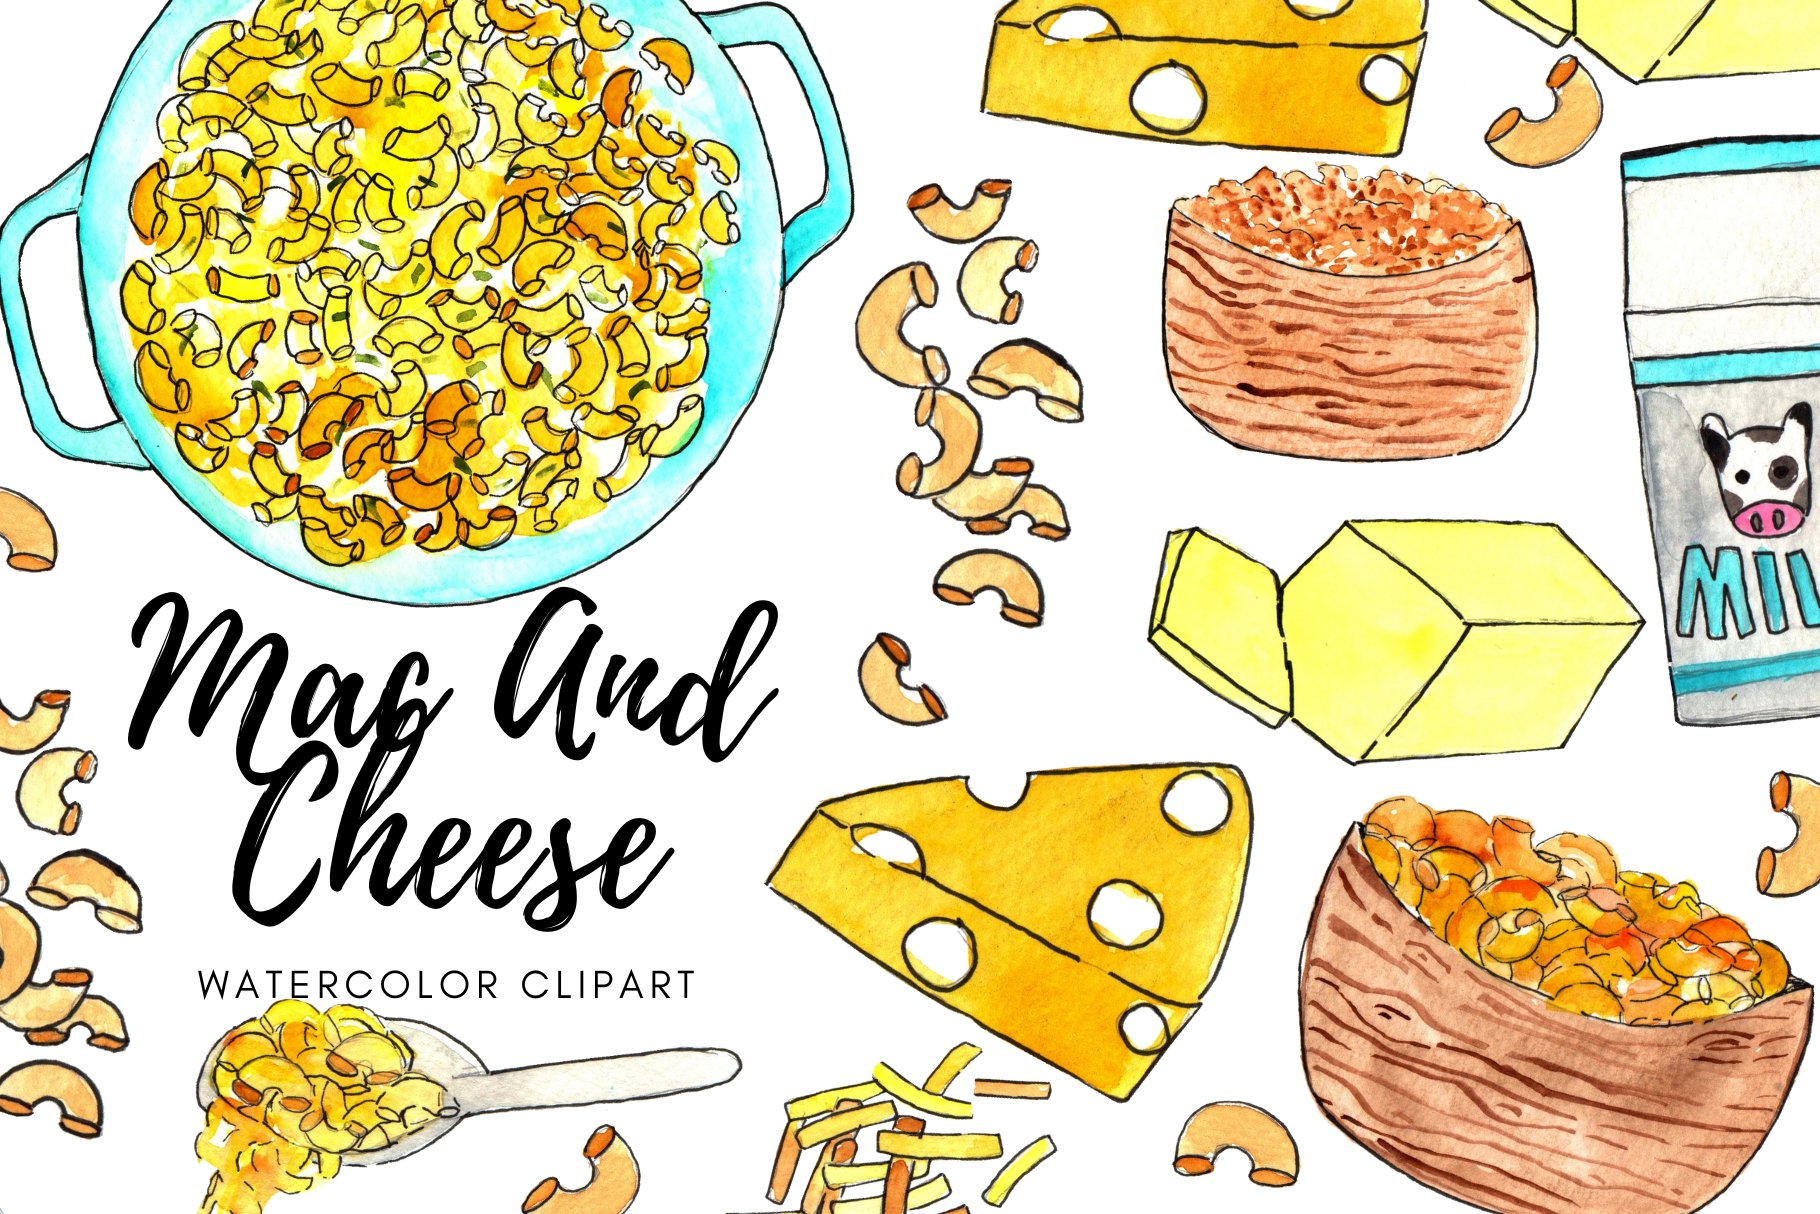 A selection of lovely images of hard cheese and pasta.